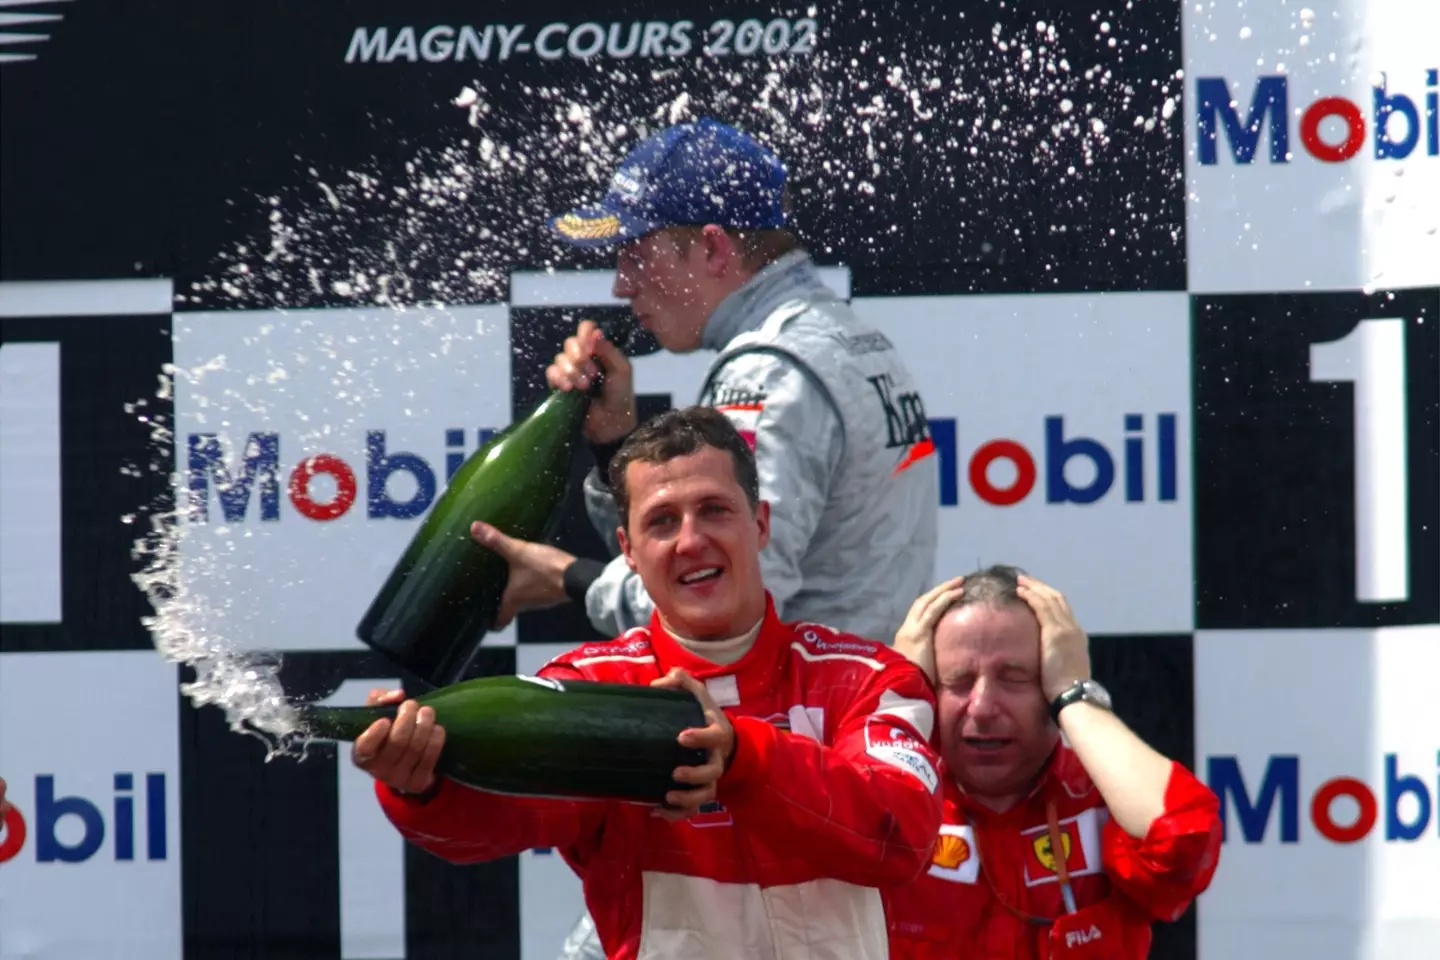 Jean Todt regularly visits Michael Schumacher at his home and has said they watch F1 together.